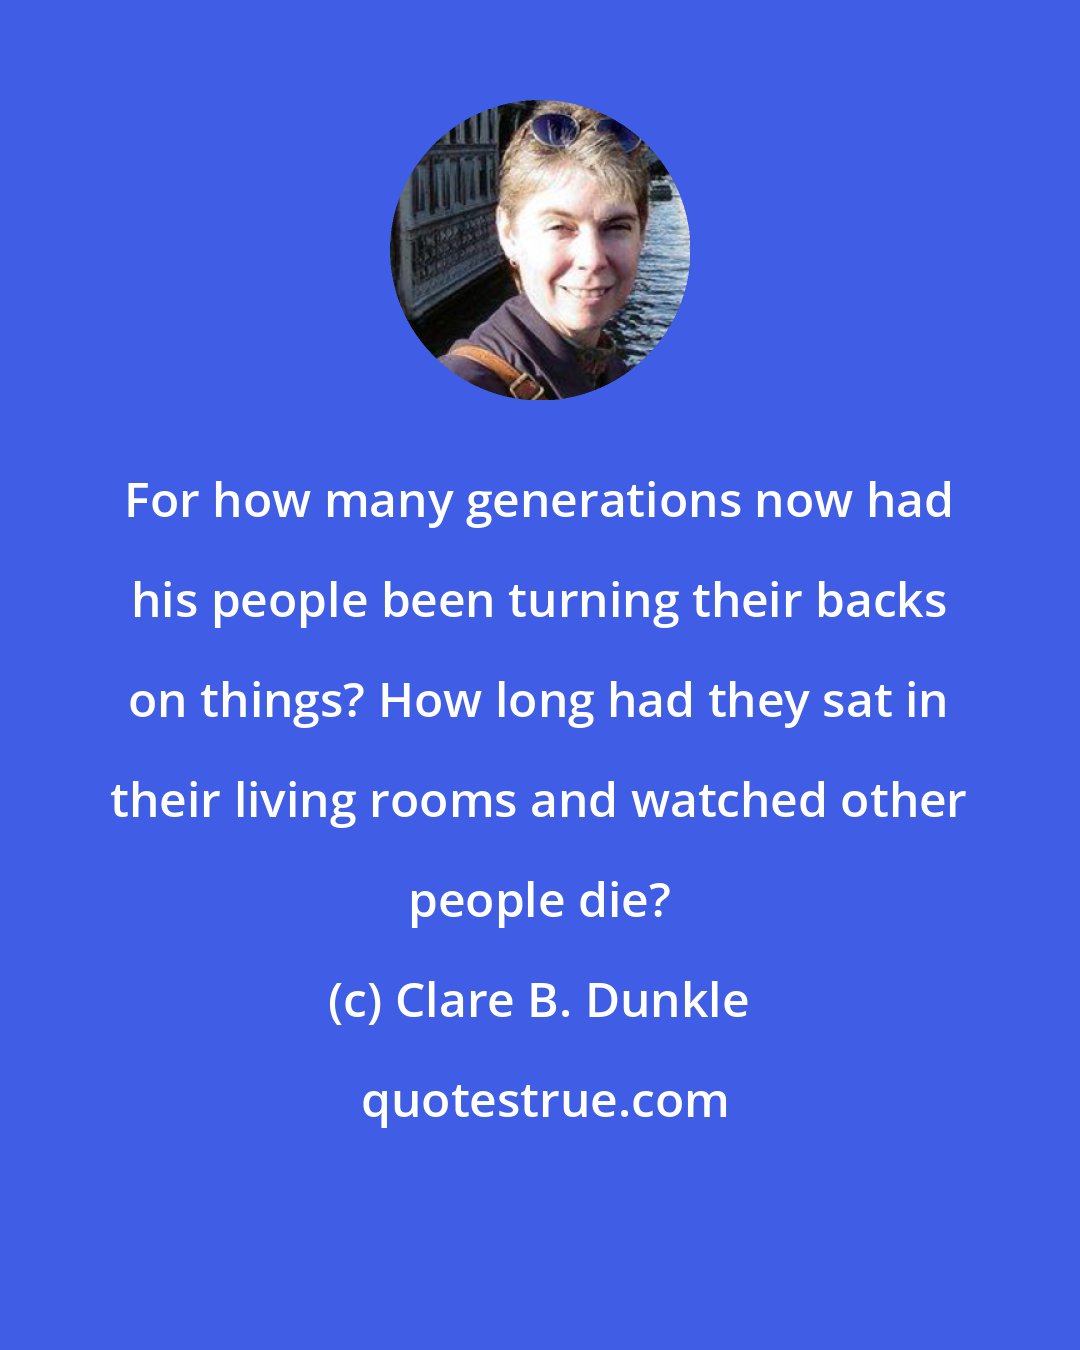 Clare B. Dunkle: For how many generations now had his people been turning their backs on things? How long had they sat in their living rooms and watched other people die?